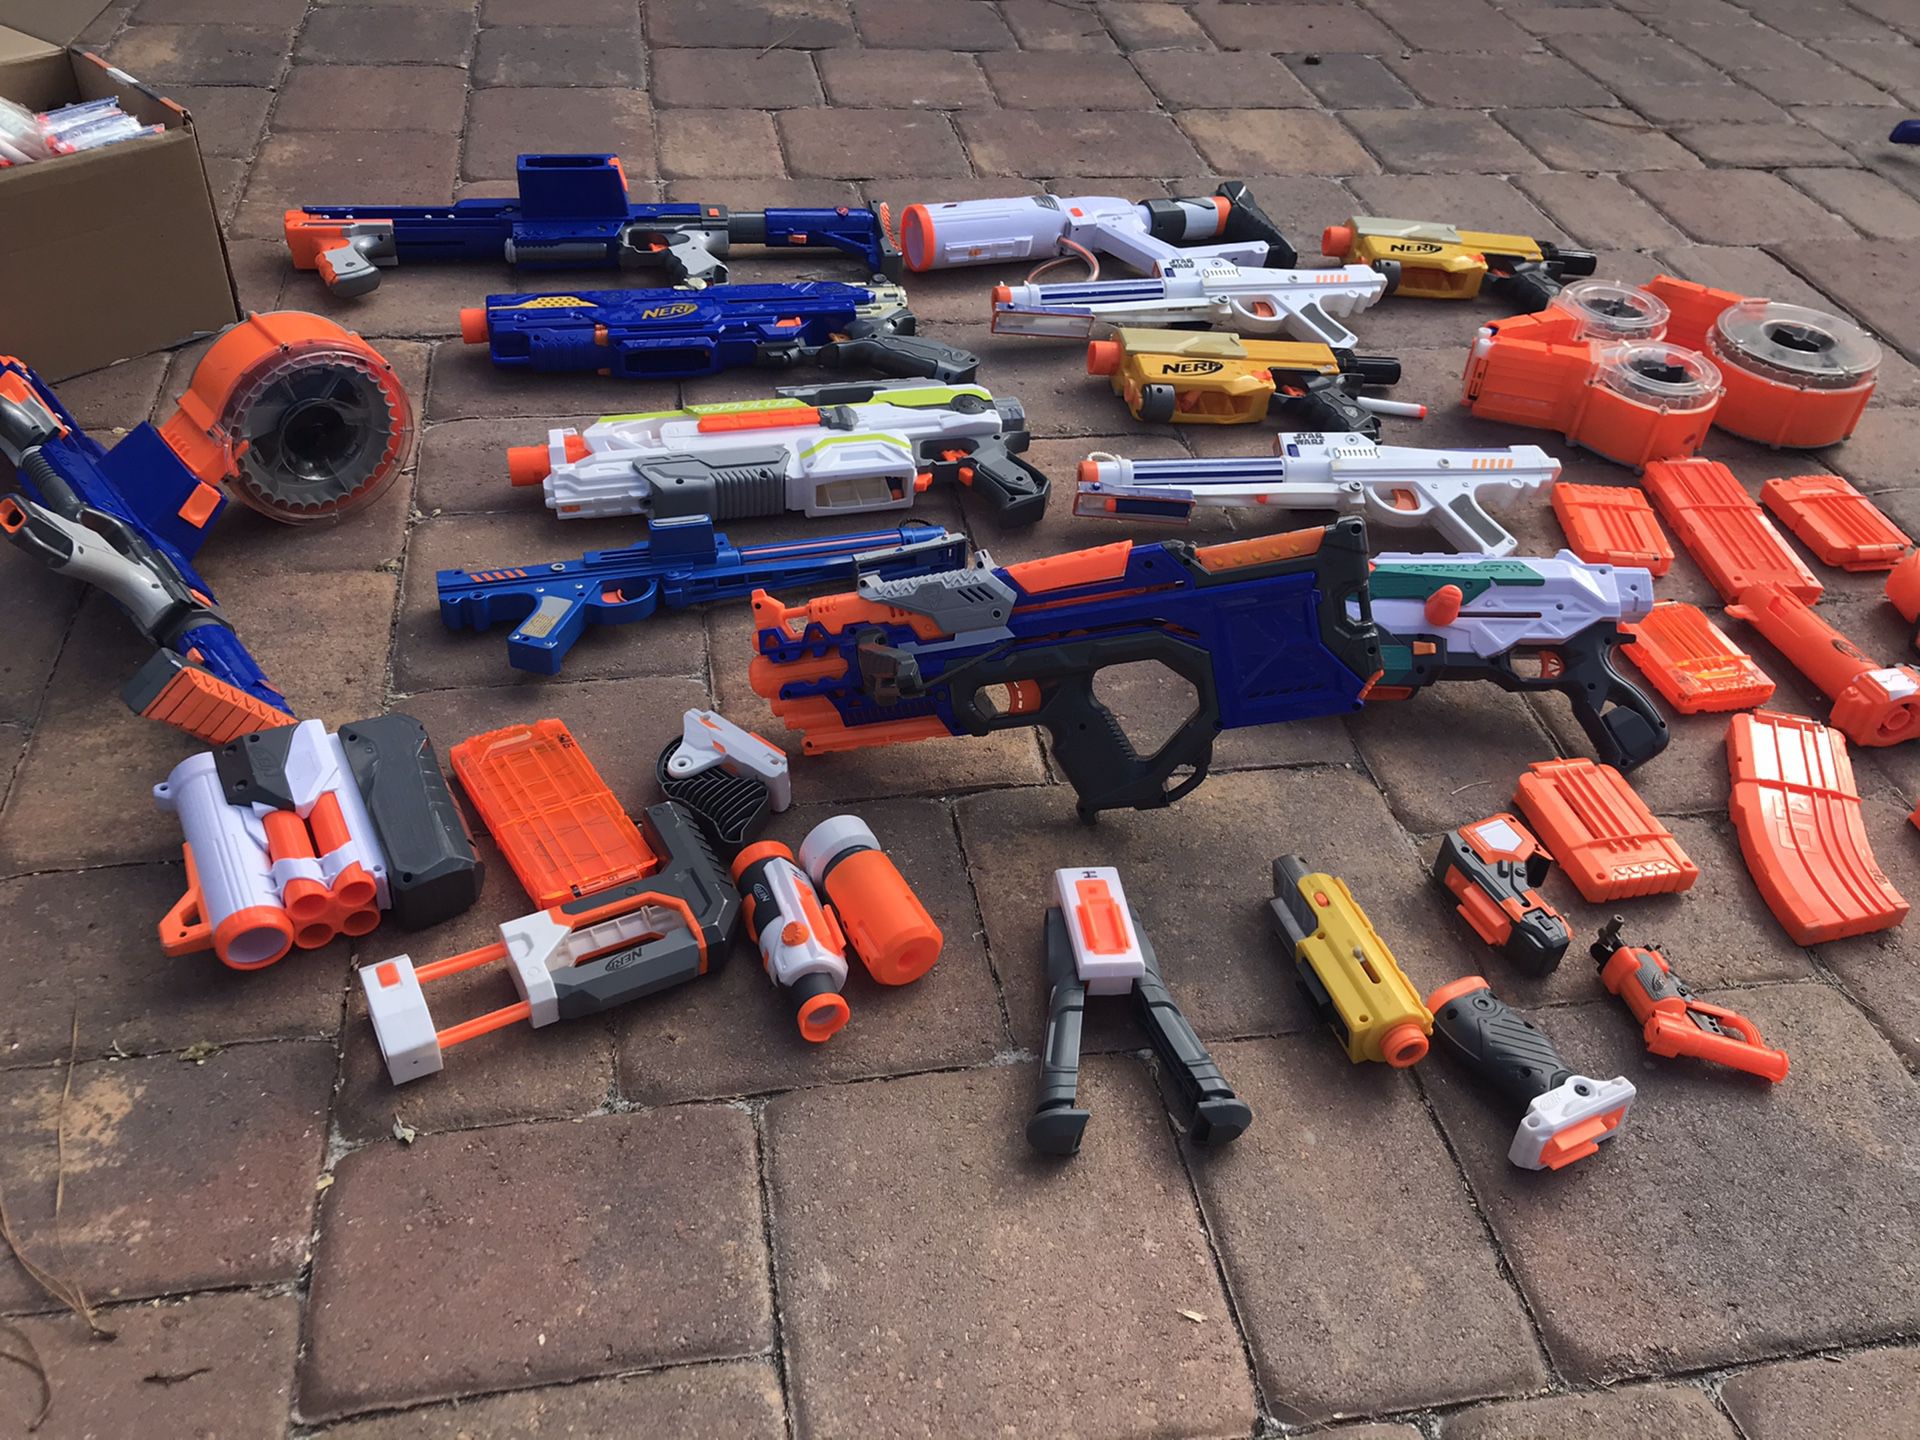 Huge lot of Nerf guns, darts and accessories